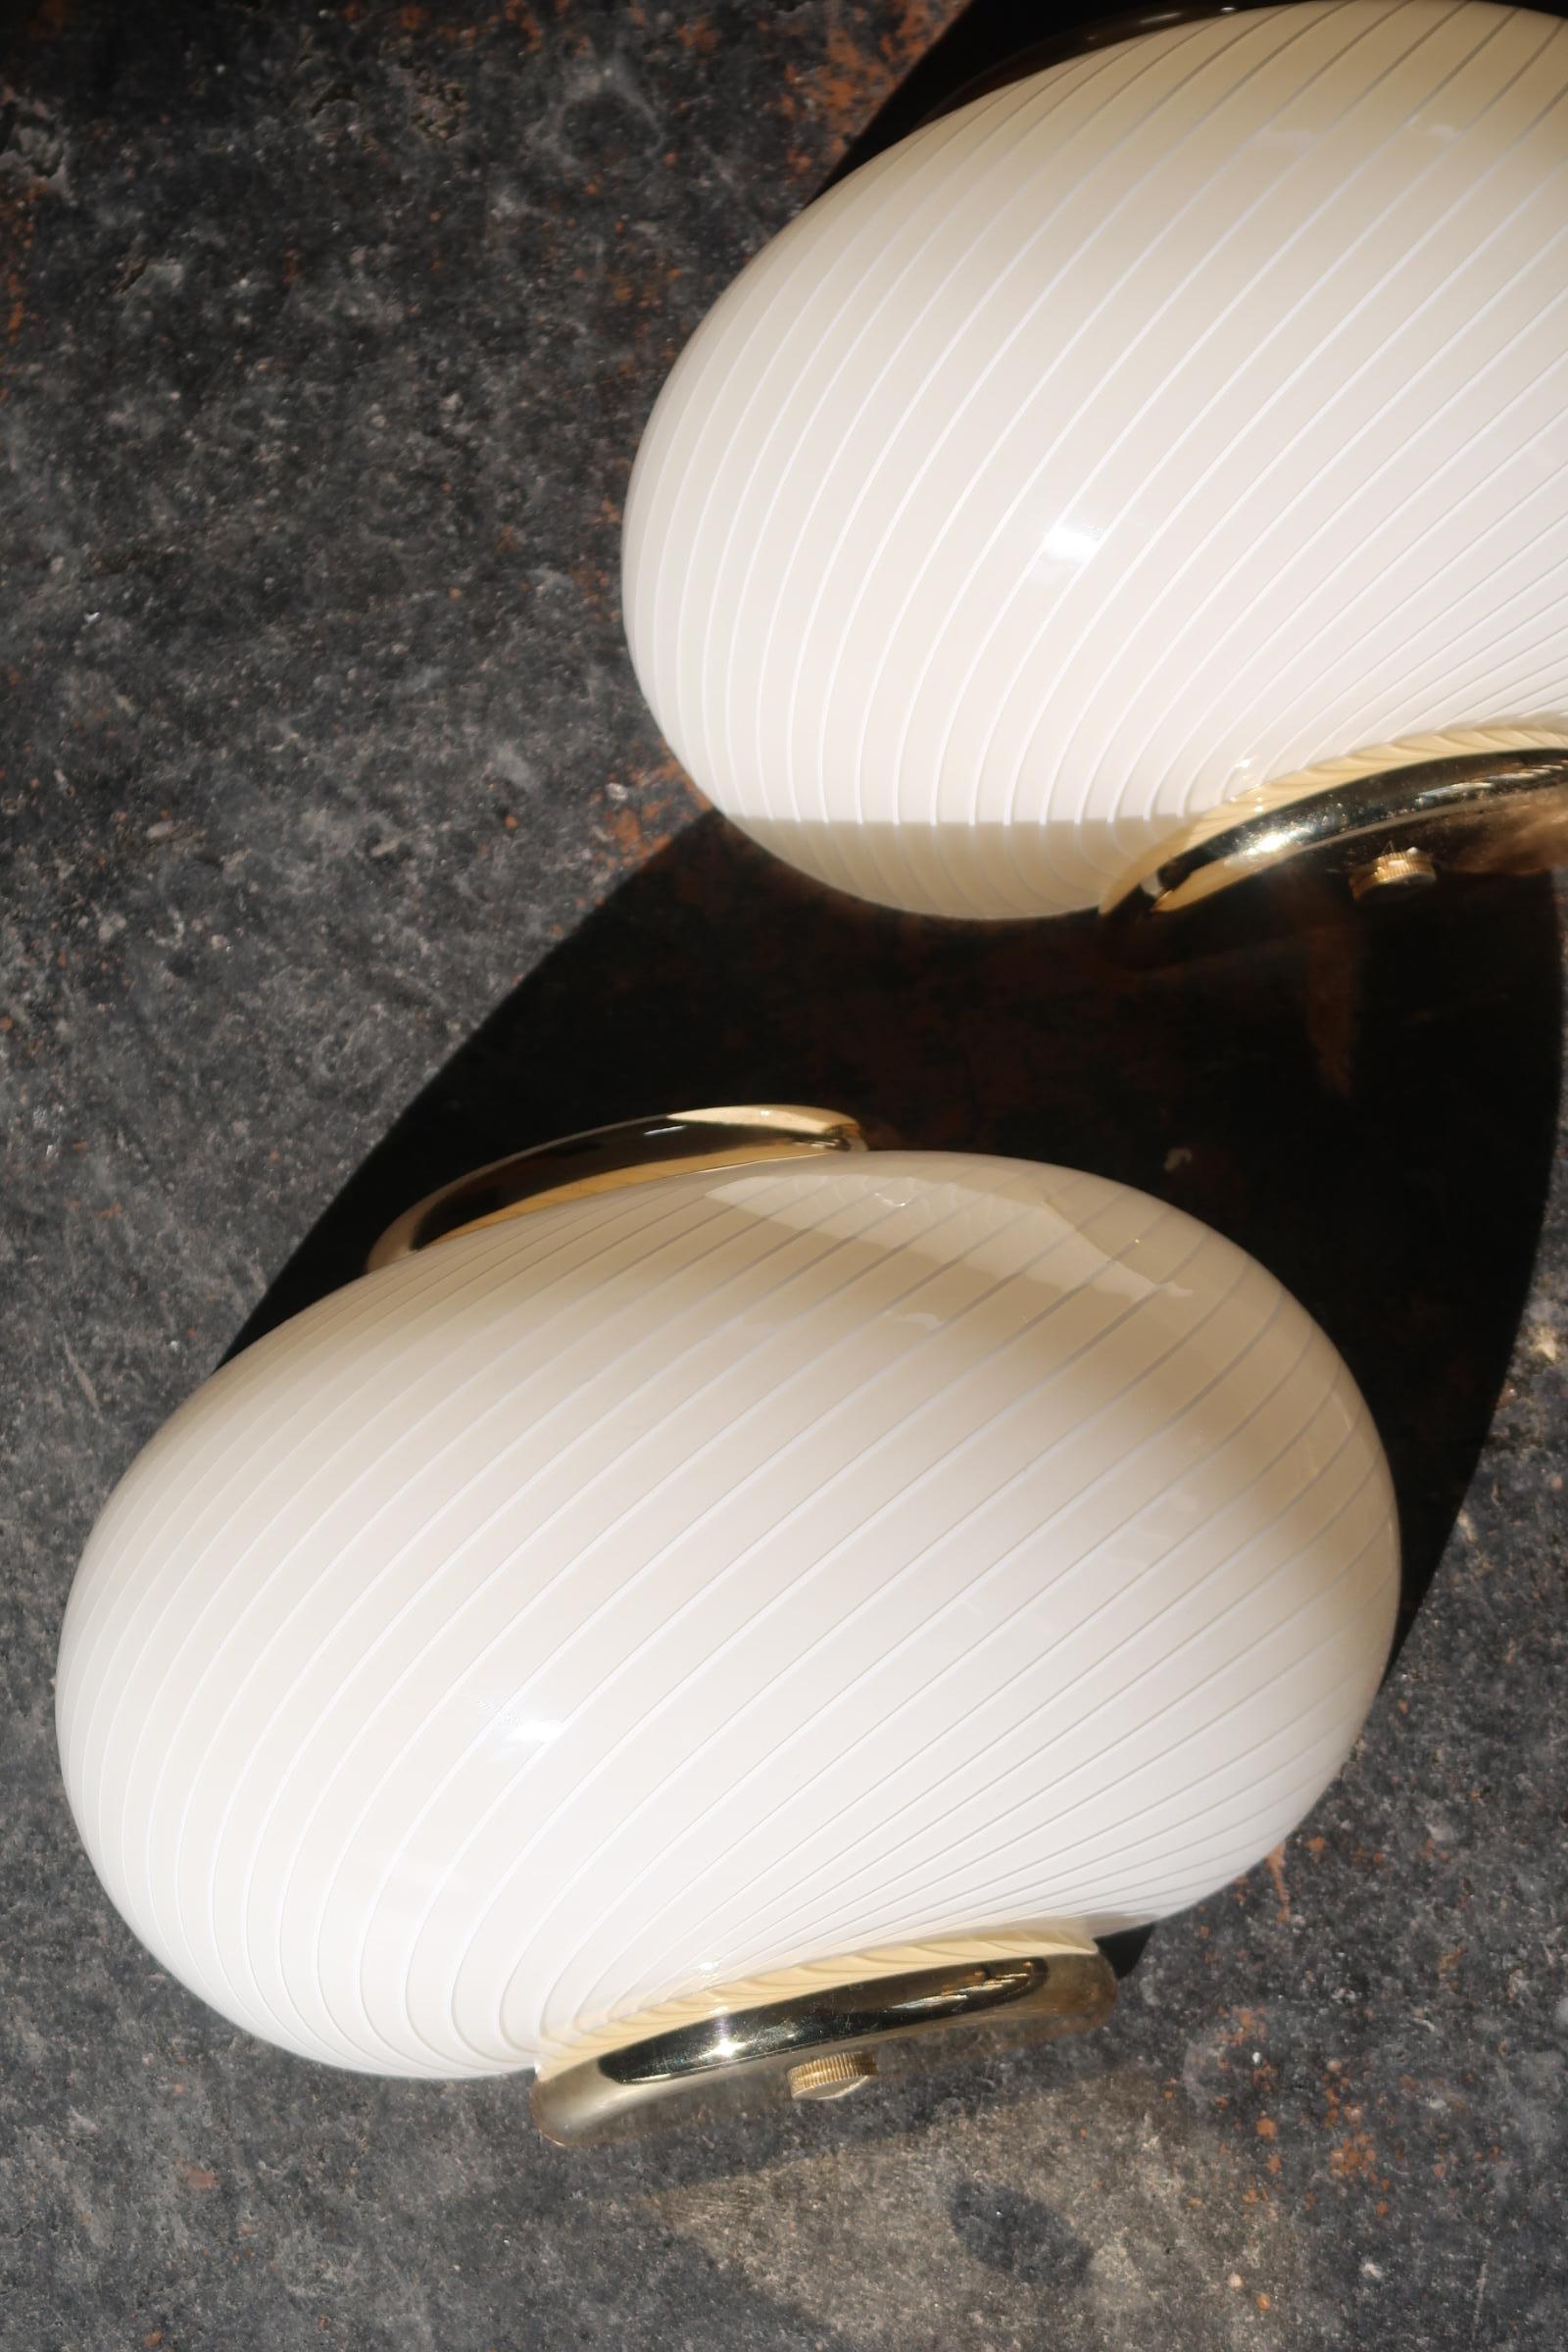 Murano Glass Pair of Vintage Murano 1970s Wall Scone Lamps in Cream Swirl Glass with Brass